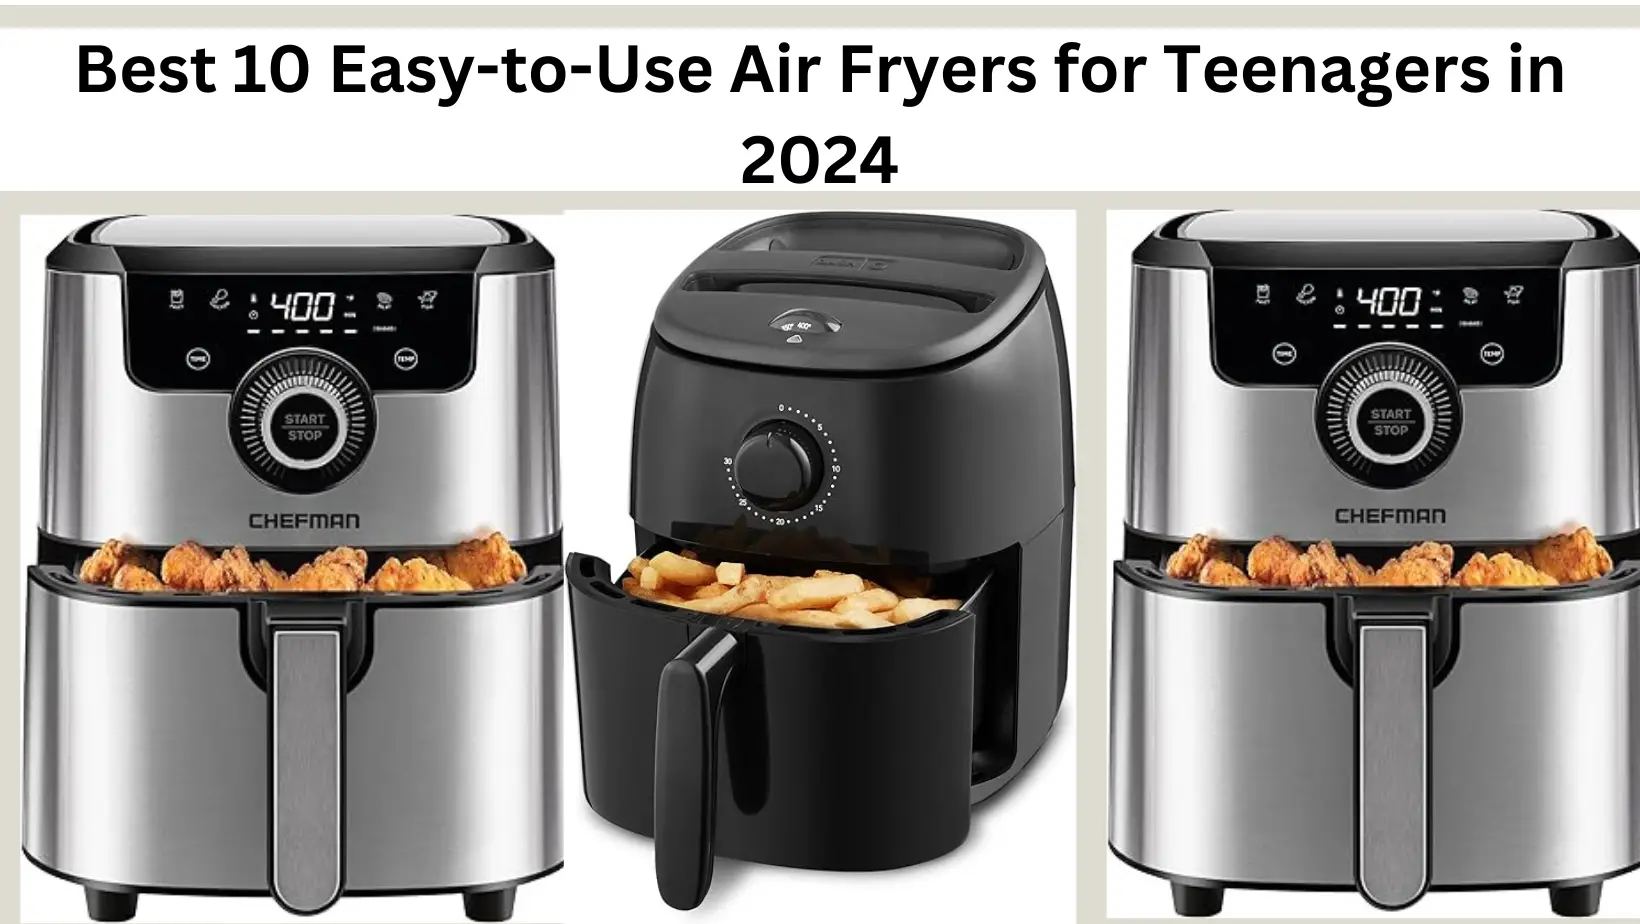 Best 10 Easy-to-Use Air Fryers for Teenagers in 2024